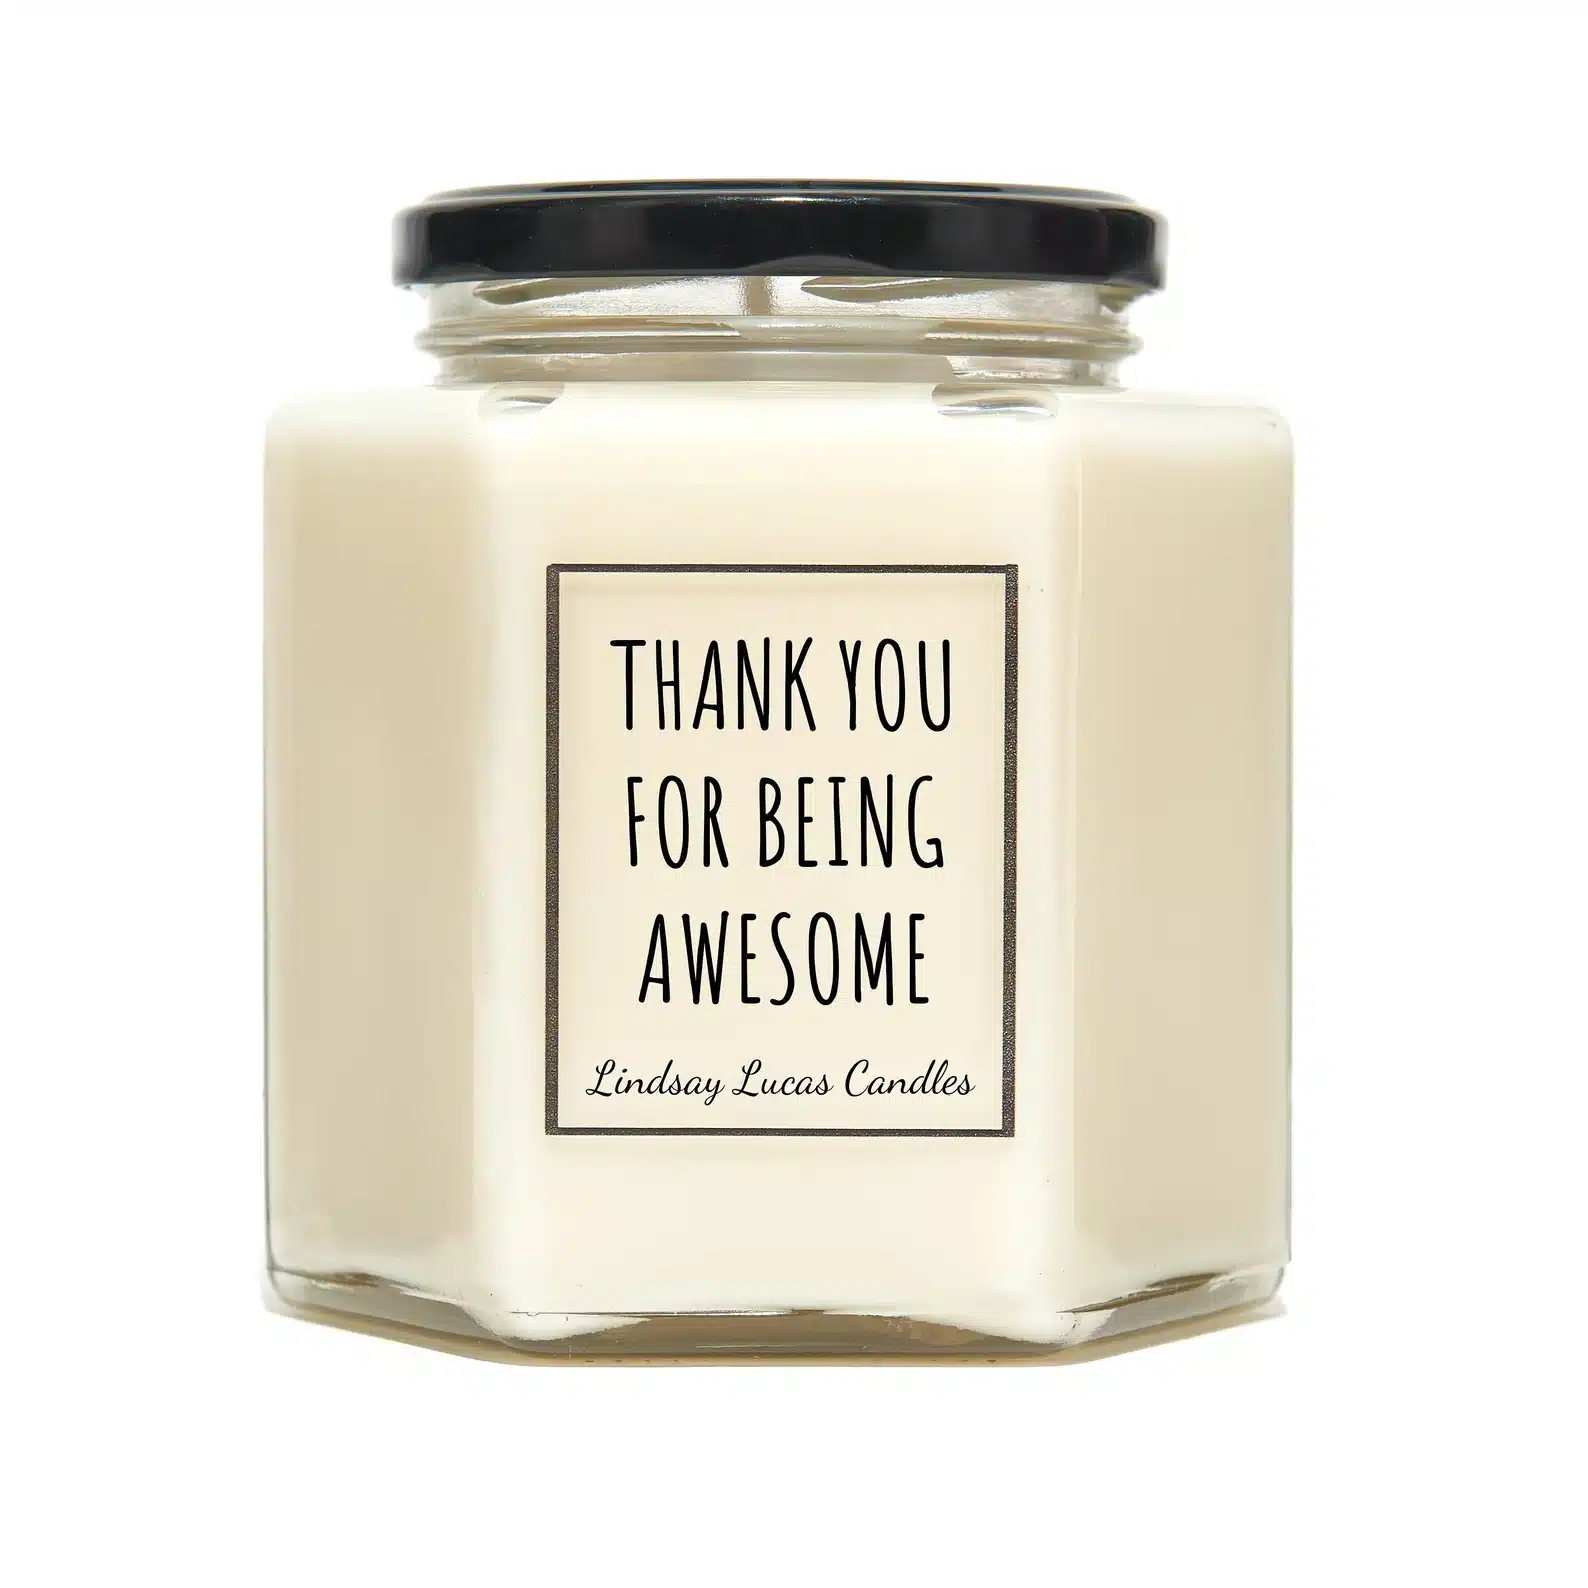 Thank You for Being Awesome Candle